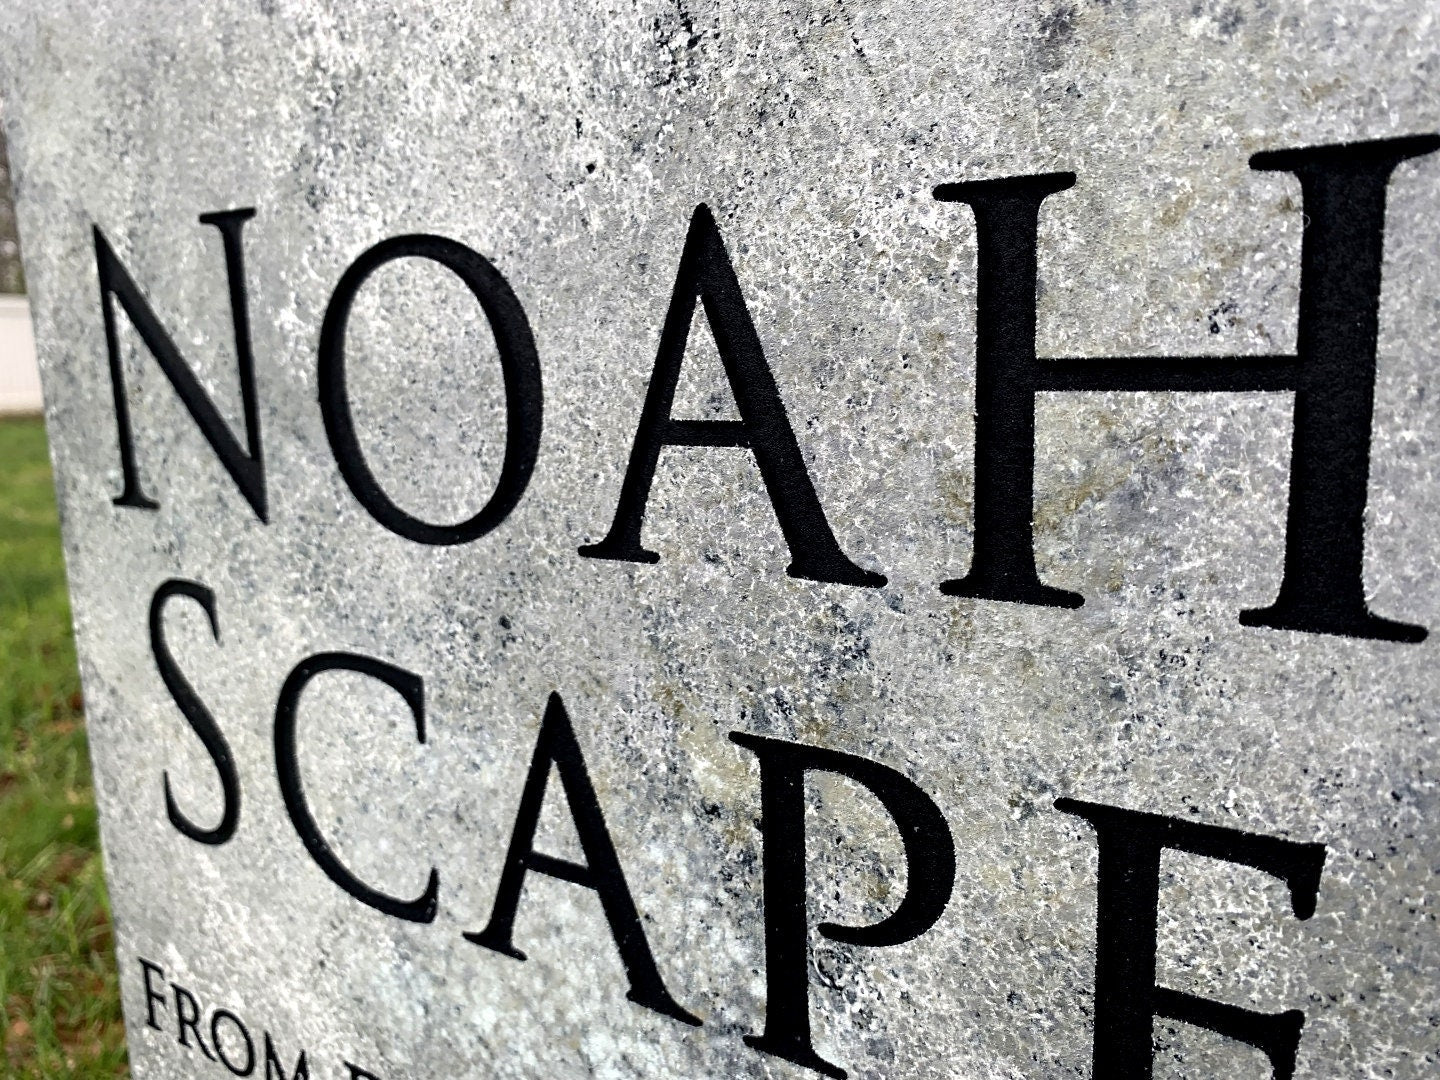 Noah Scape from Death or Taxes Funny Halloween Tombstone